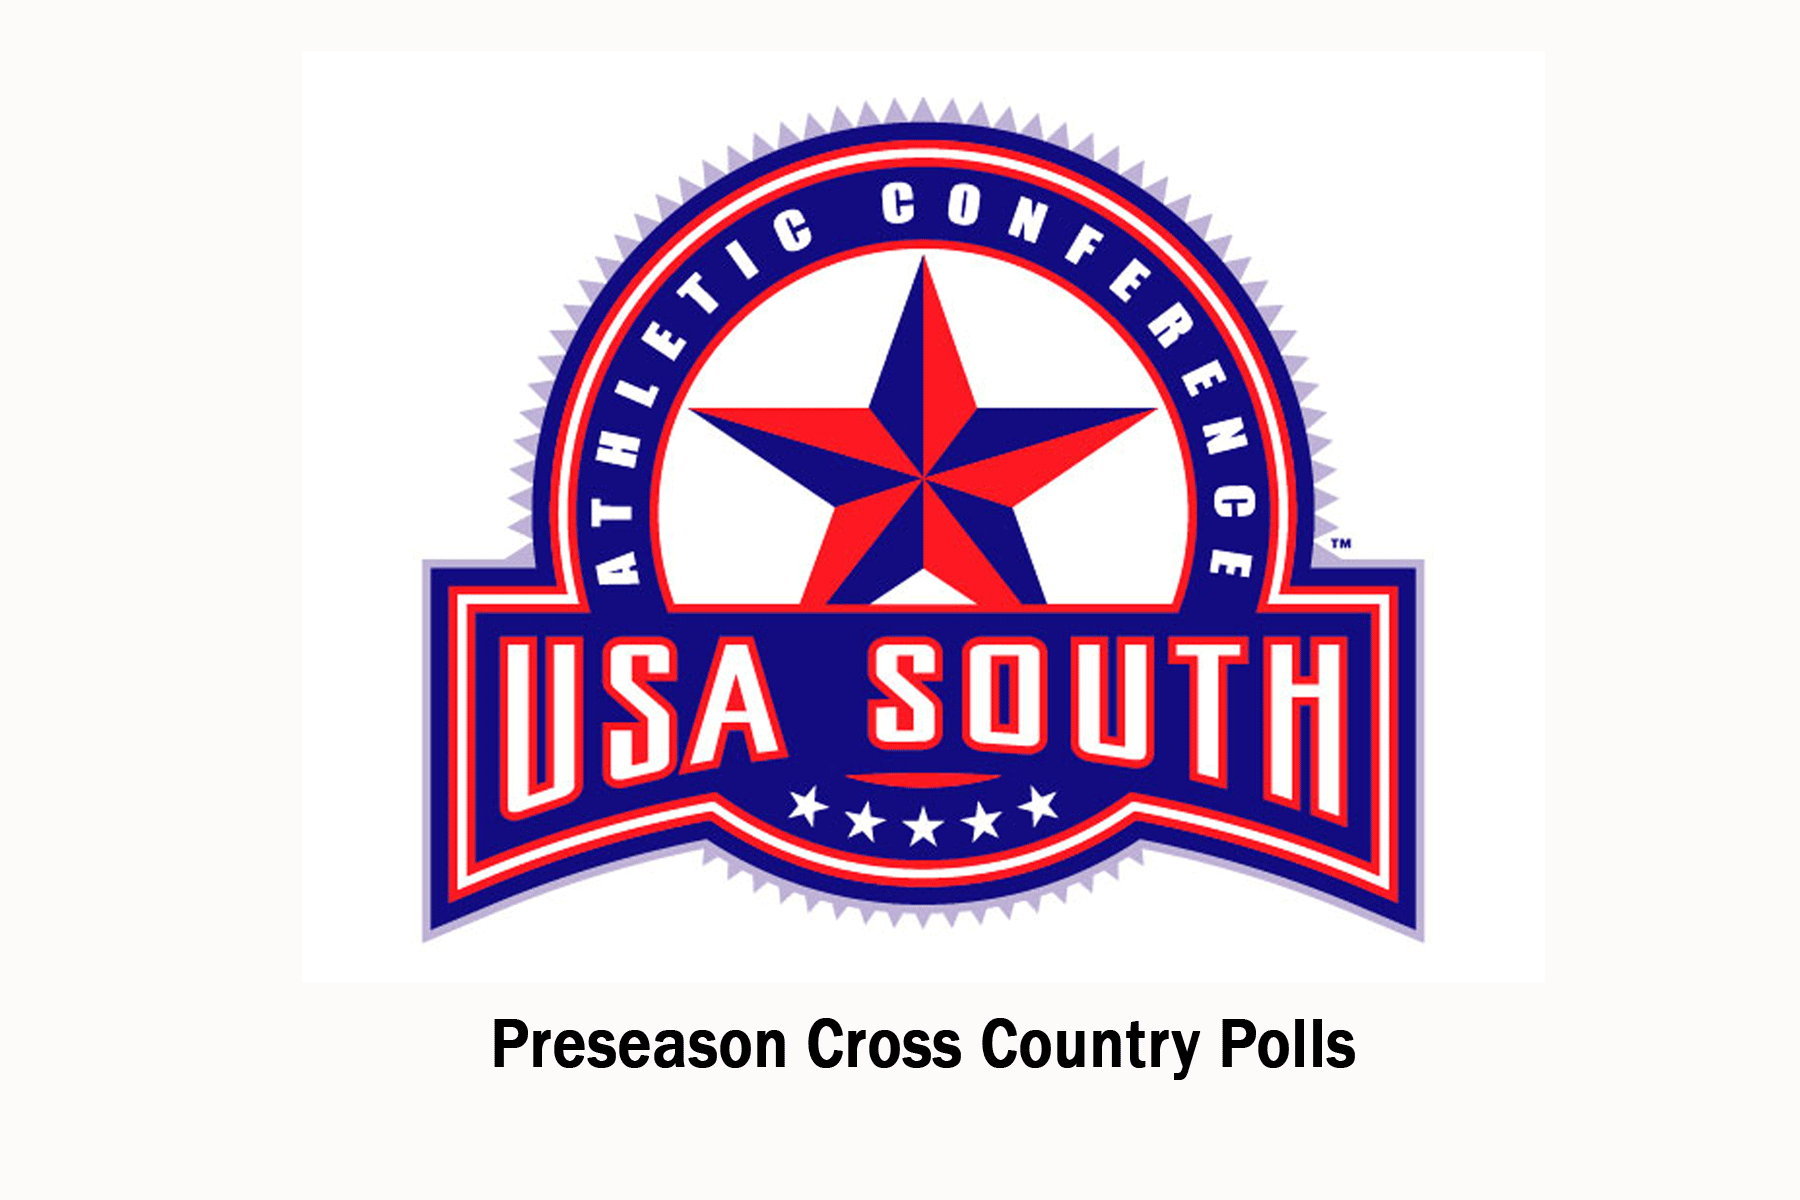 USA South releases conference cross country polls